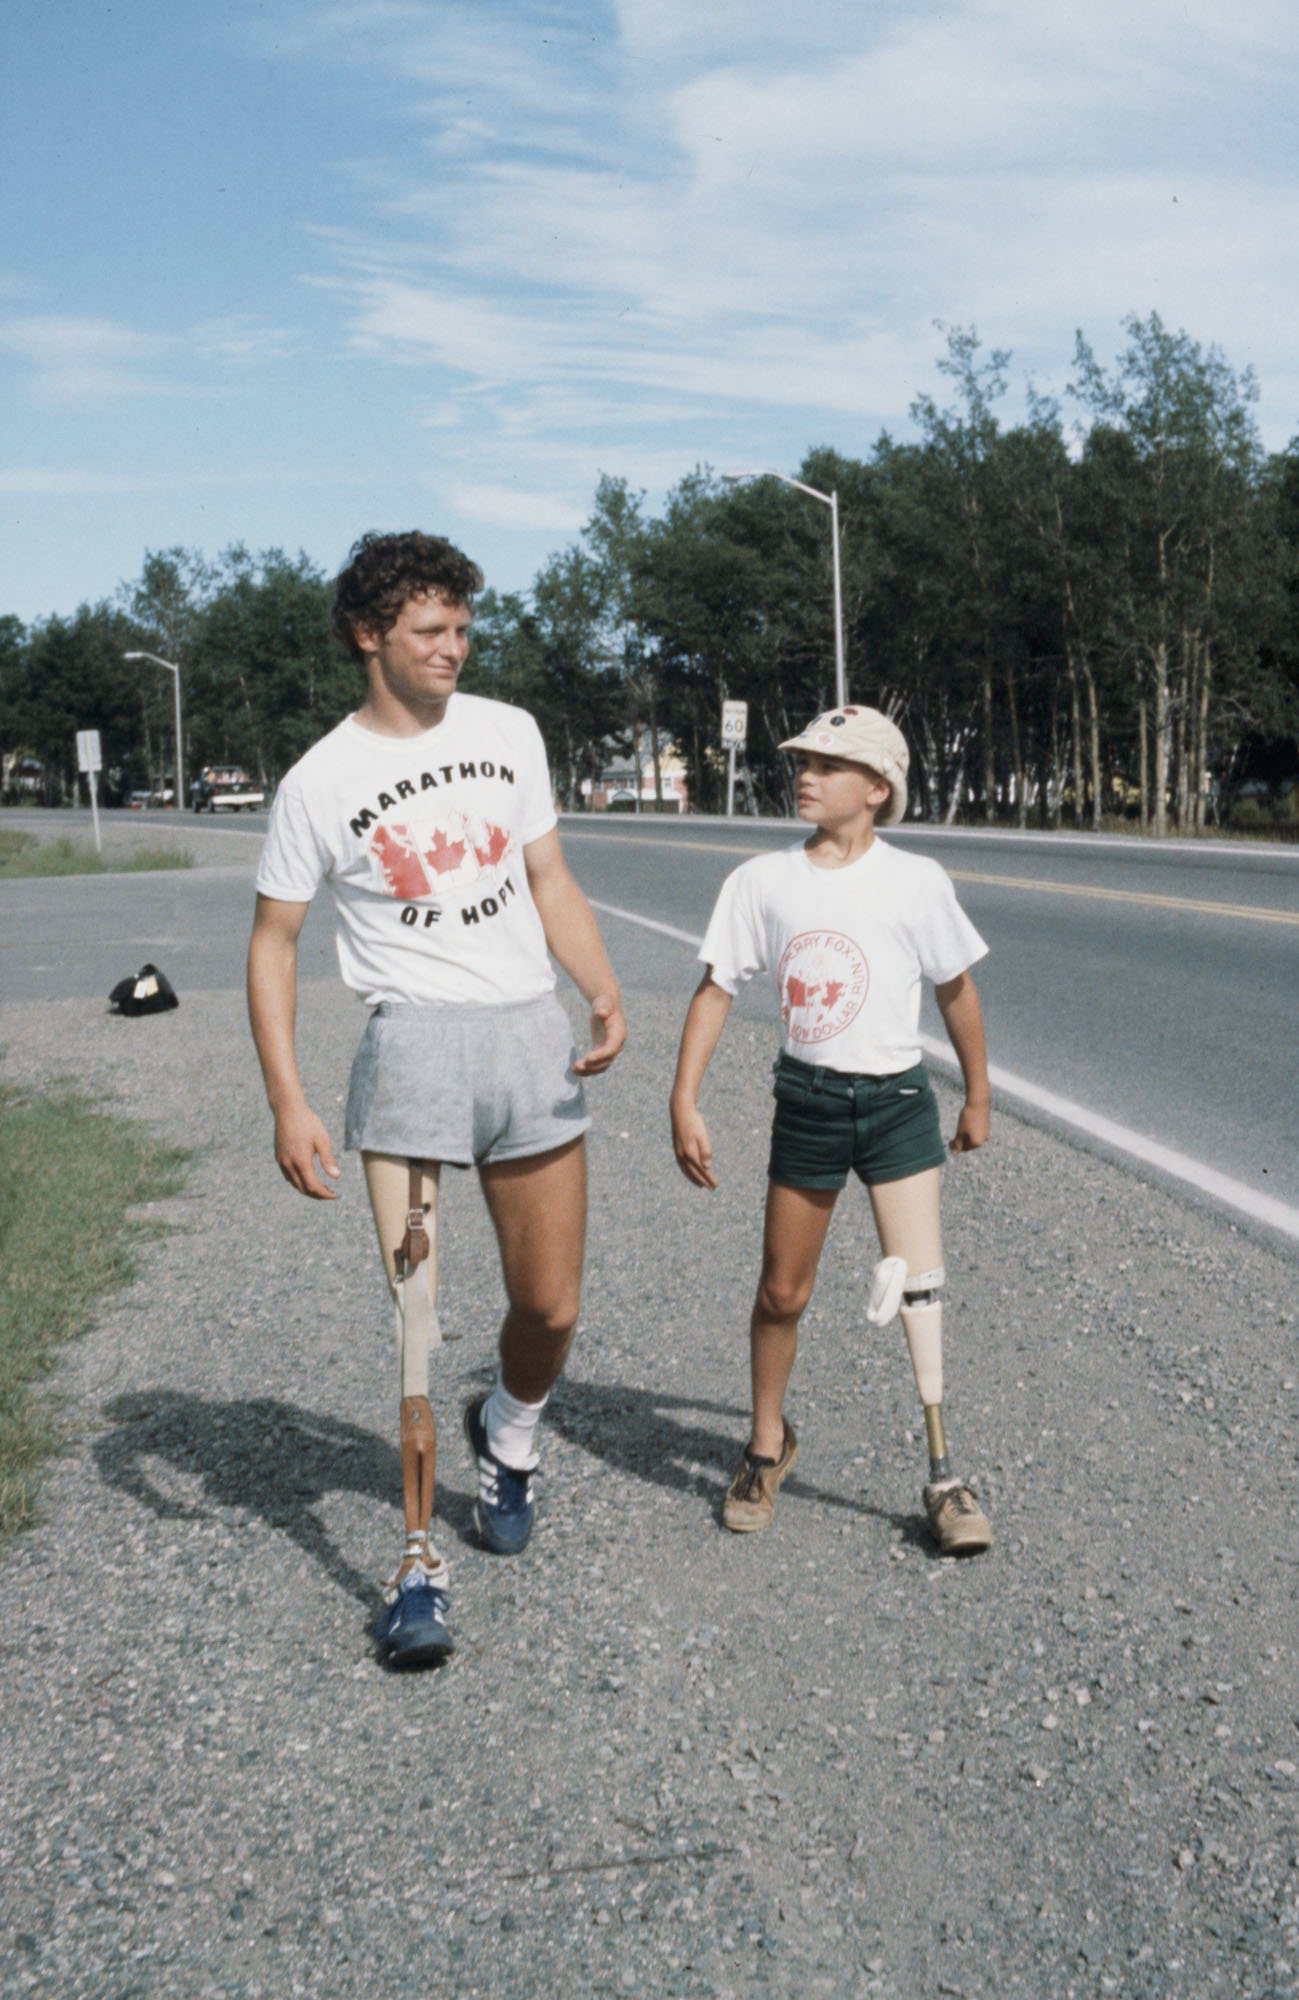 Terry Fox and a young boy, both with prosthetic legs, walk along a roadside wearing casual athletic clothing